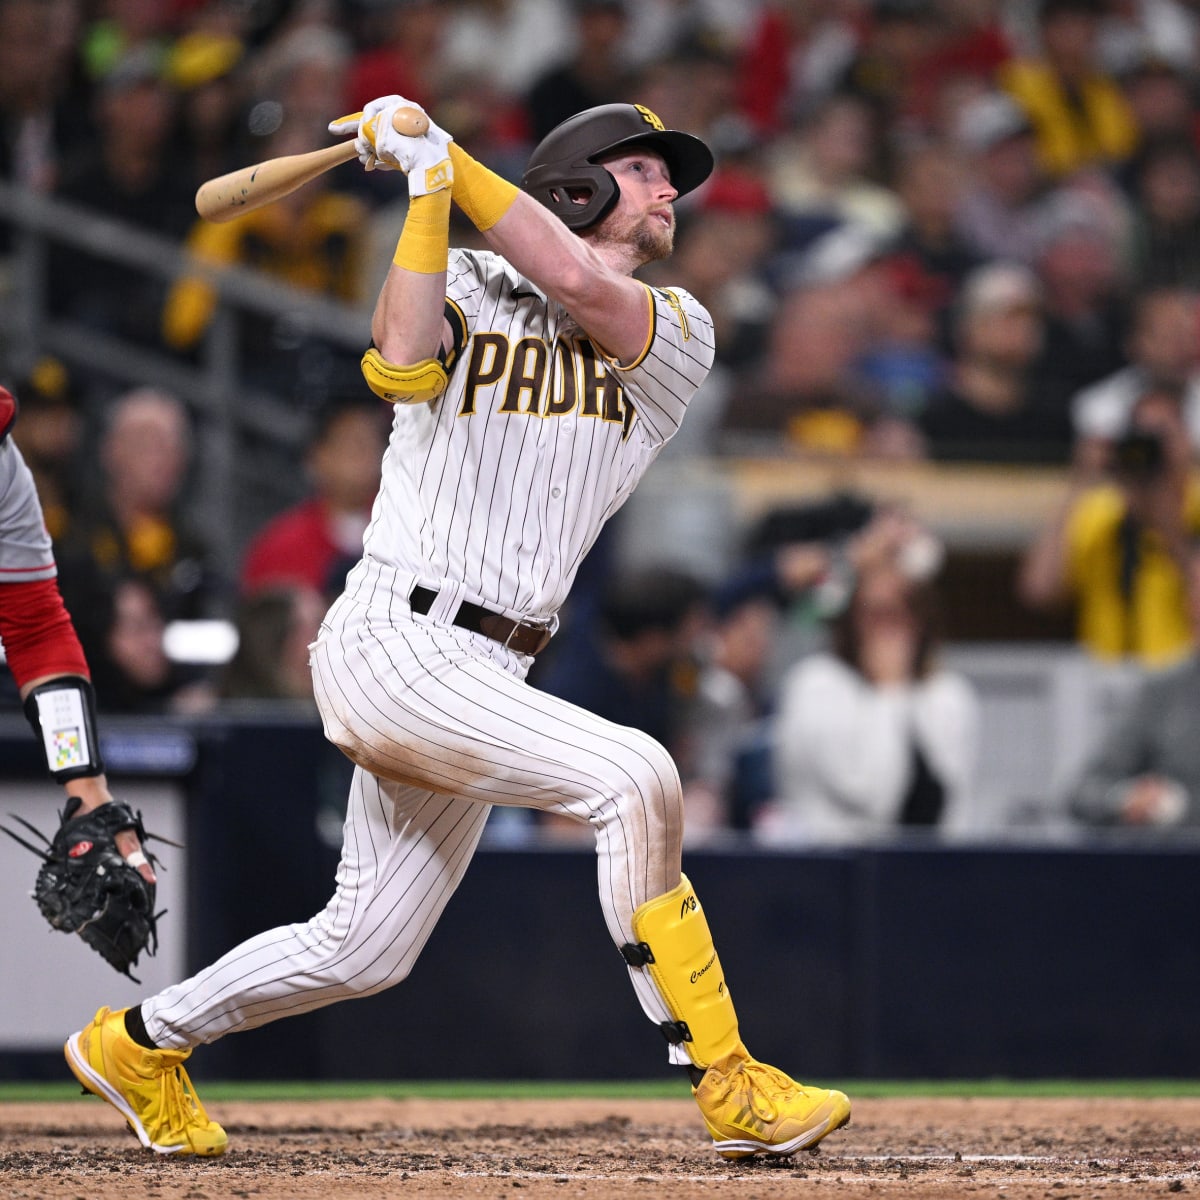 Padres News: Jake Cronenworth Keeping His Head Up Through Frustrating  Season - Sports Illustrated Inside The Padres News, Analysis and More